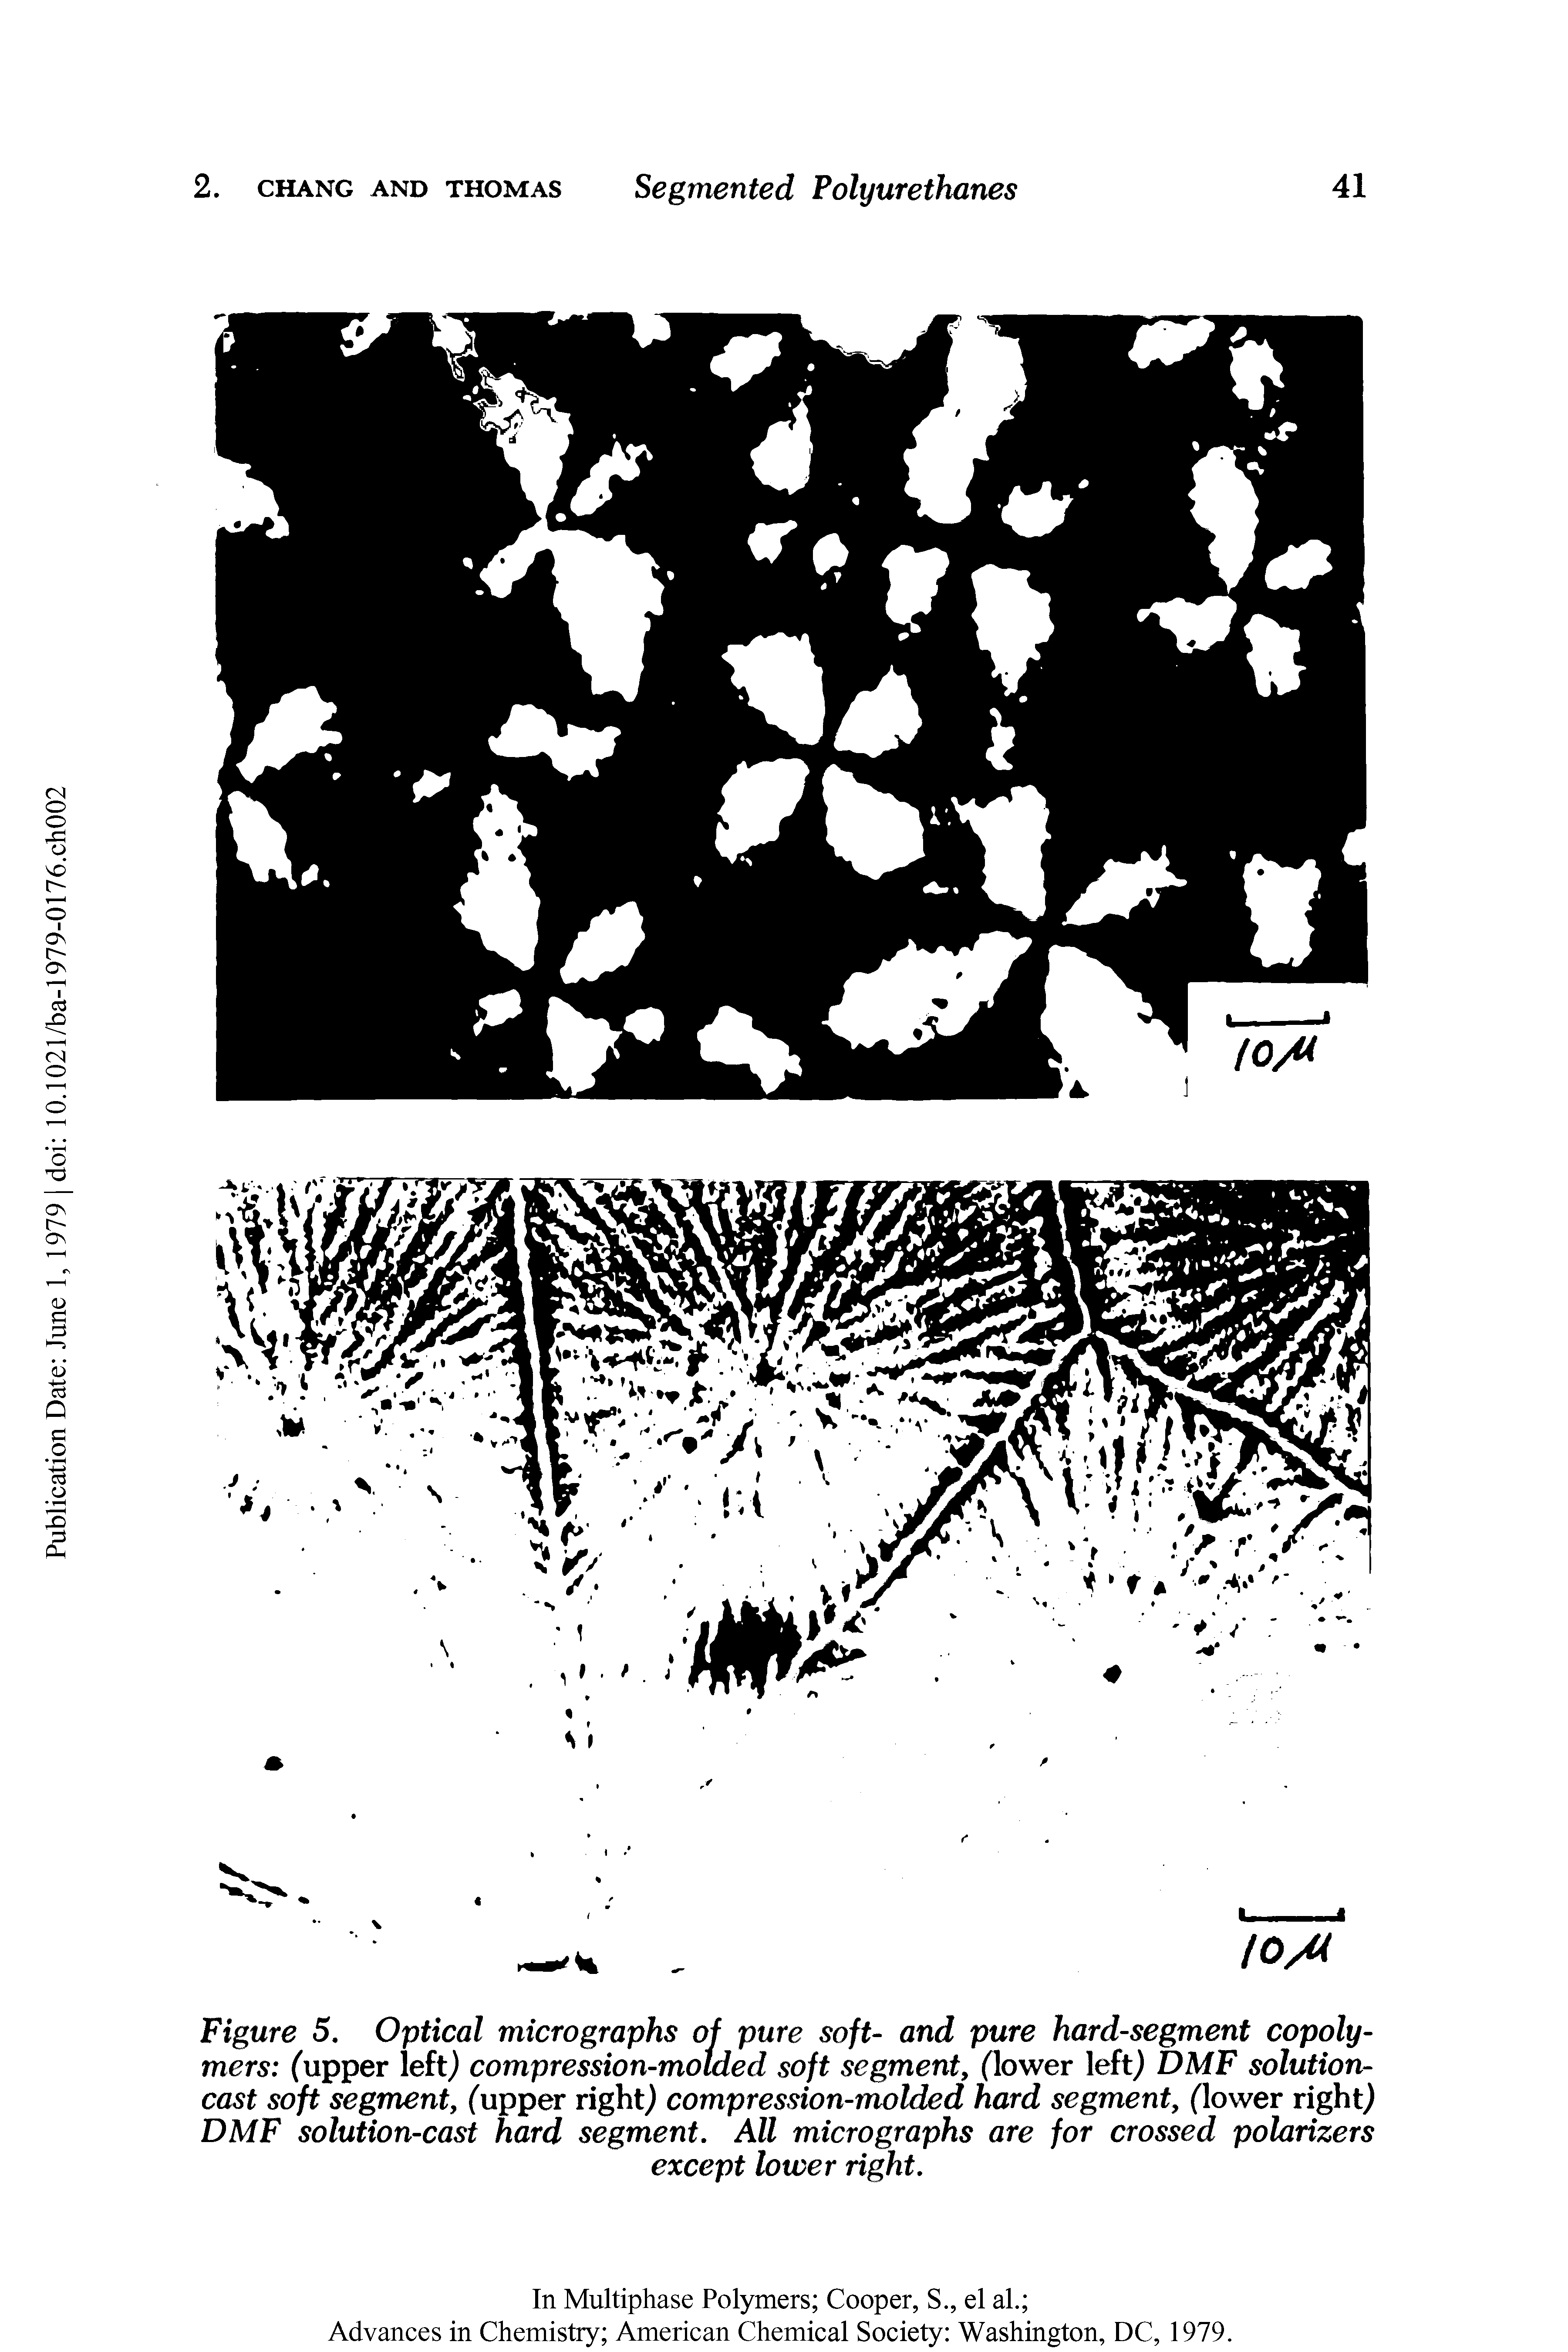 Figure 5. Optical micrographs of pure soft- and pure hard-segment copolymers (upper left) compression-molded soft segment, (lower left) DMF solution-cast soft segment, (upper right) compression-molded hard segment, (lower right) DMF solution-cast hard segment. All micrographs are for crossed polarizers...